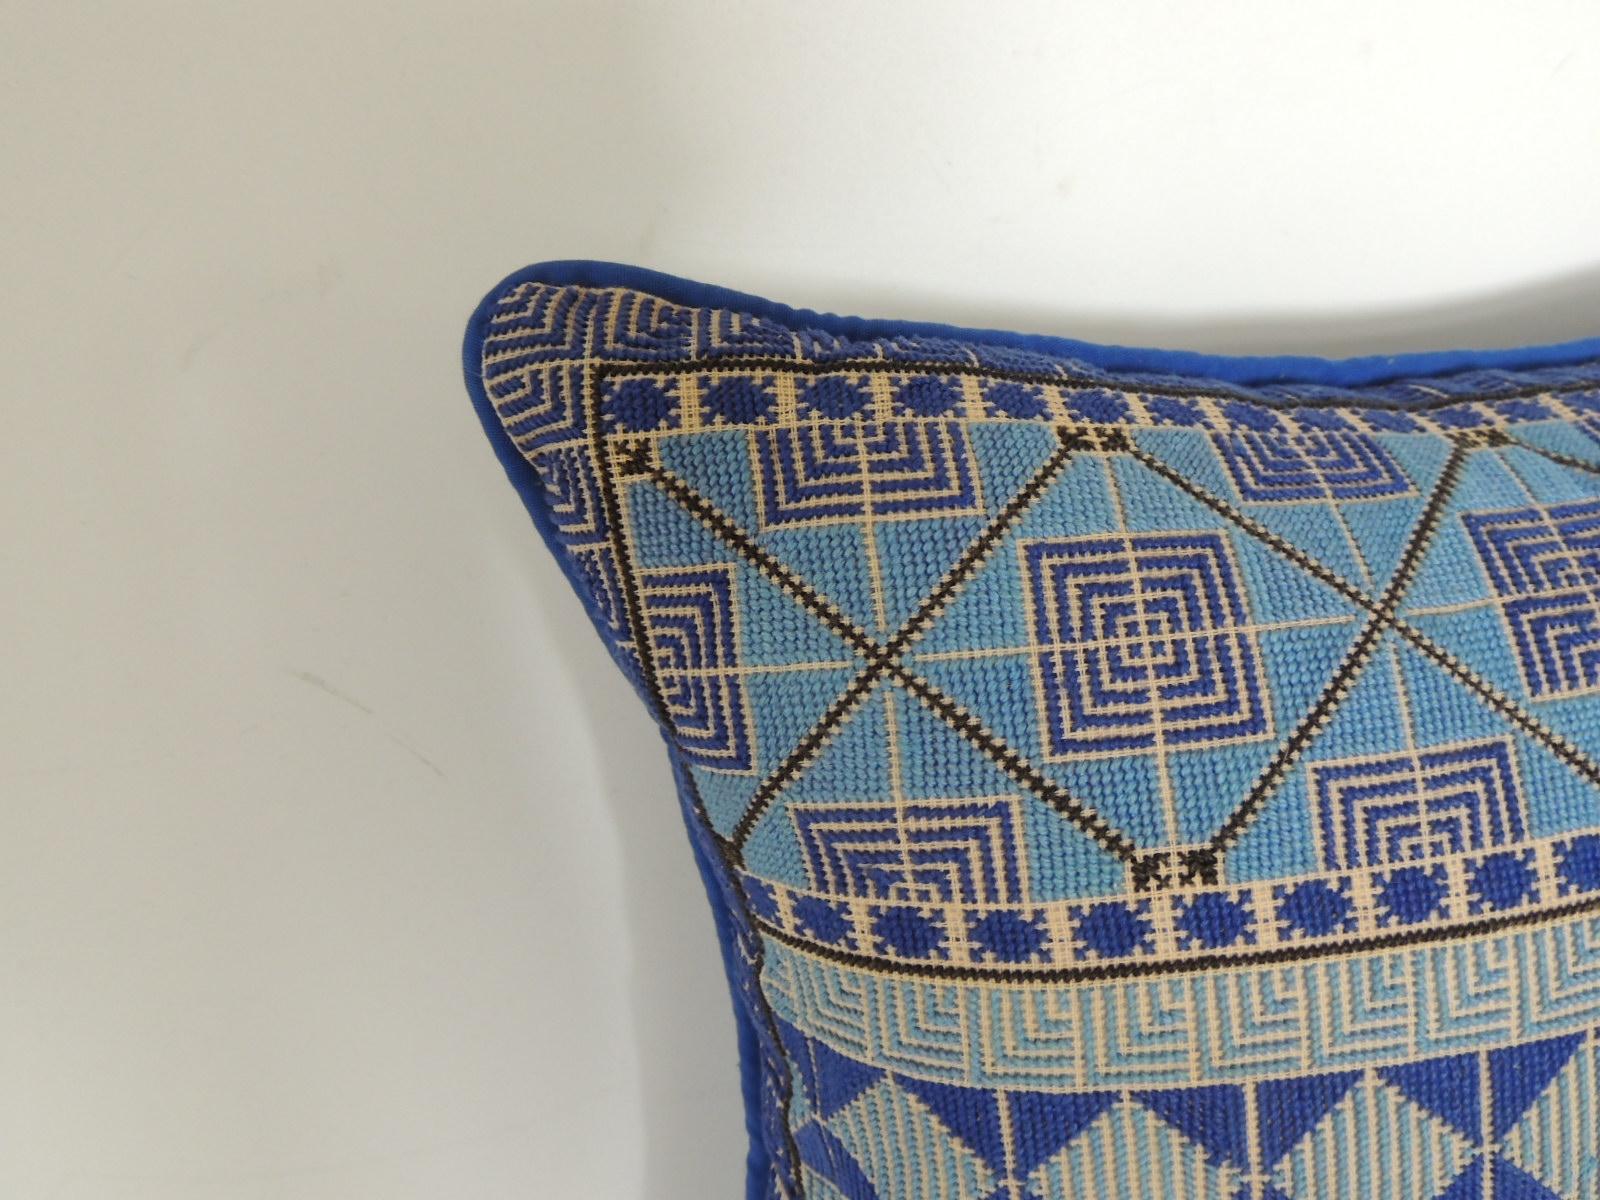 Petite Greek isle style blue and natural embroidered decorative pillow.
Blue cotton backing and self-welt, zipper closure, feather/down insert.
Size: 15